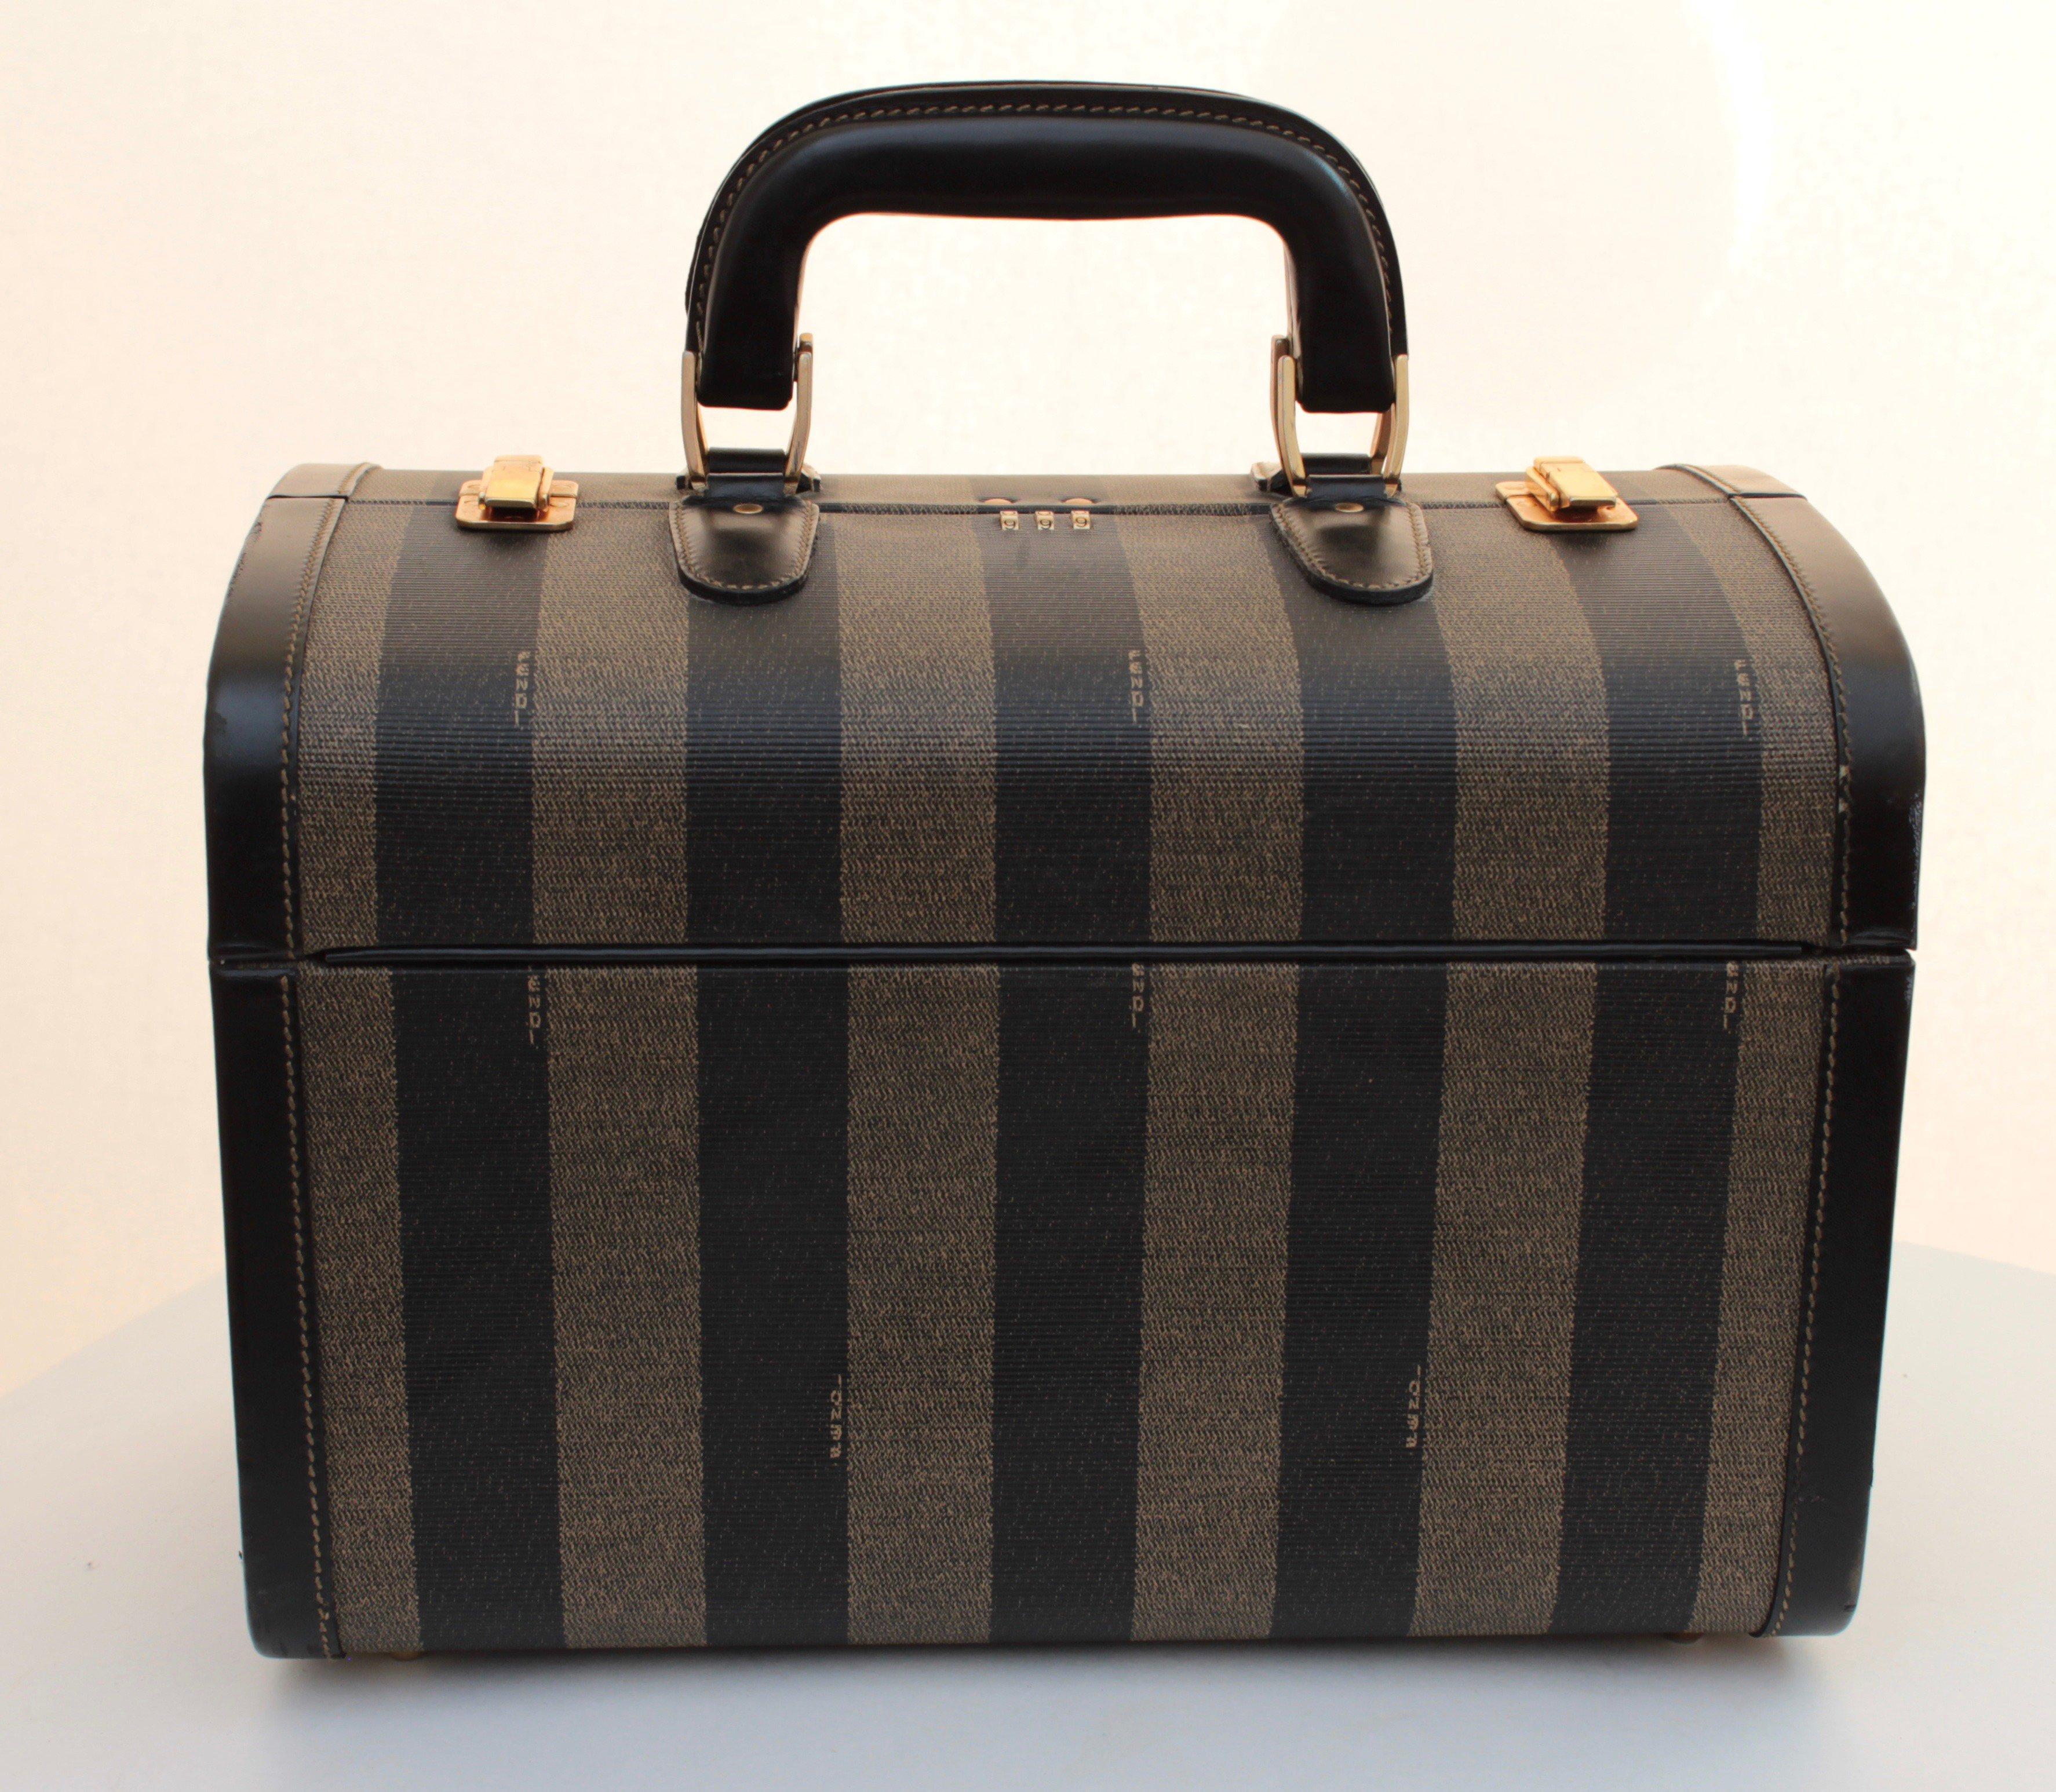 Travel in style with this super rare train case or carry on bag by Fendi. Made from their striped Pequin canvas, it's trimmed in leather and features two gold metal clasps and a combination lock (we do not have the combination). Inside, it's lined